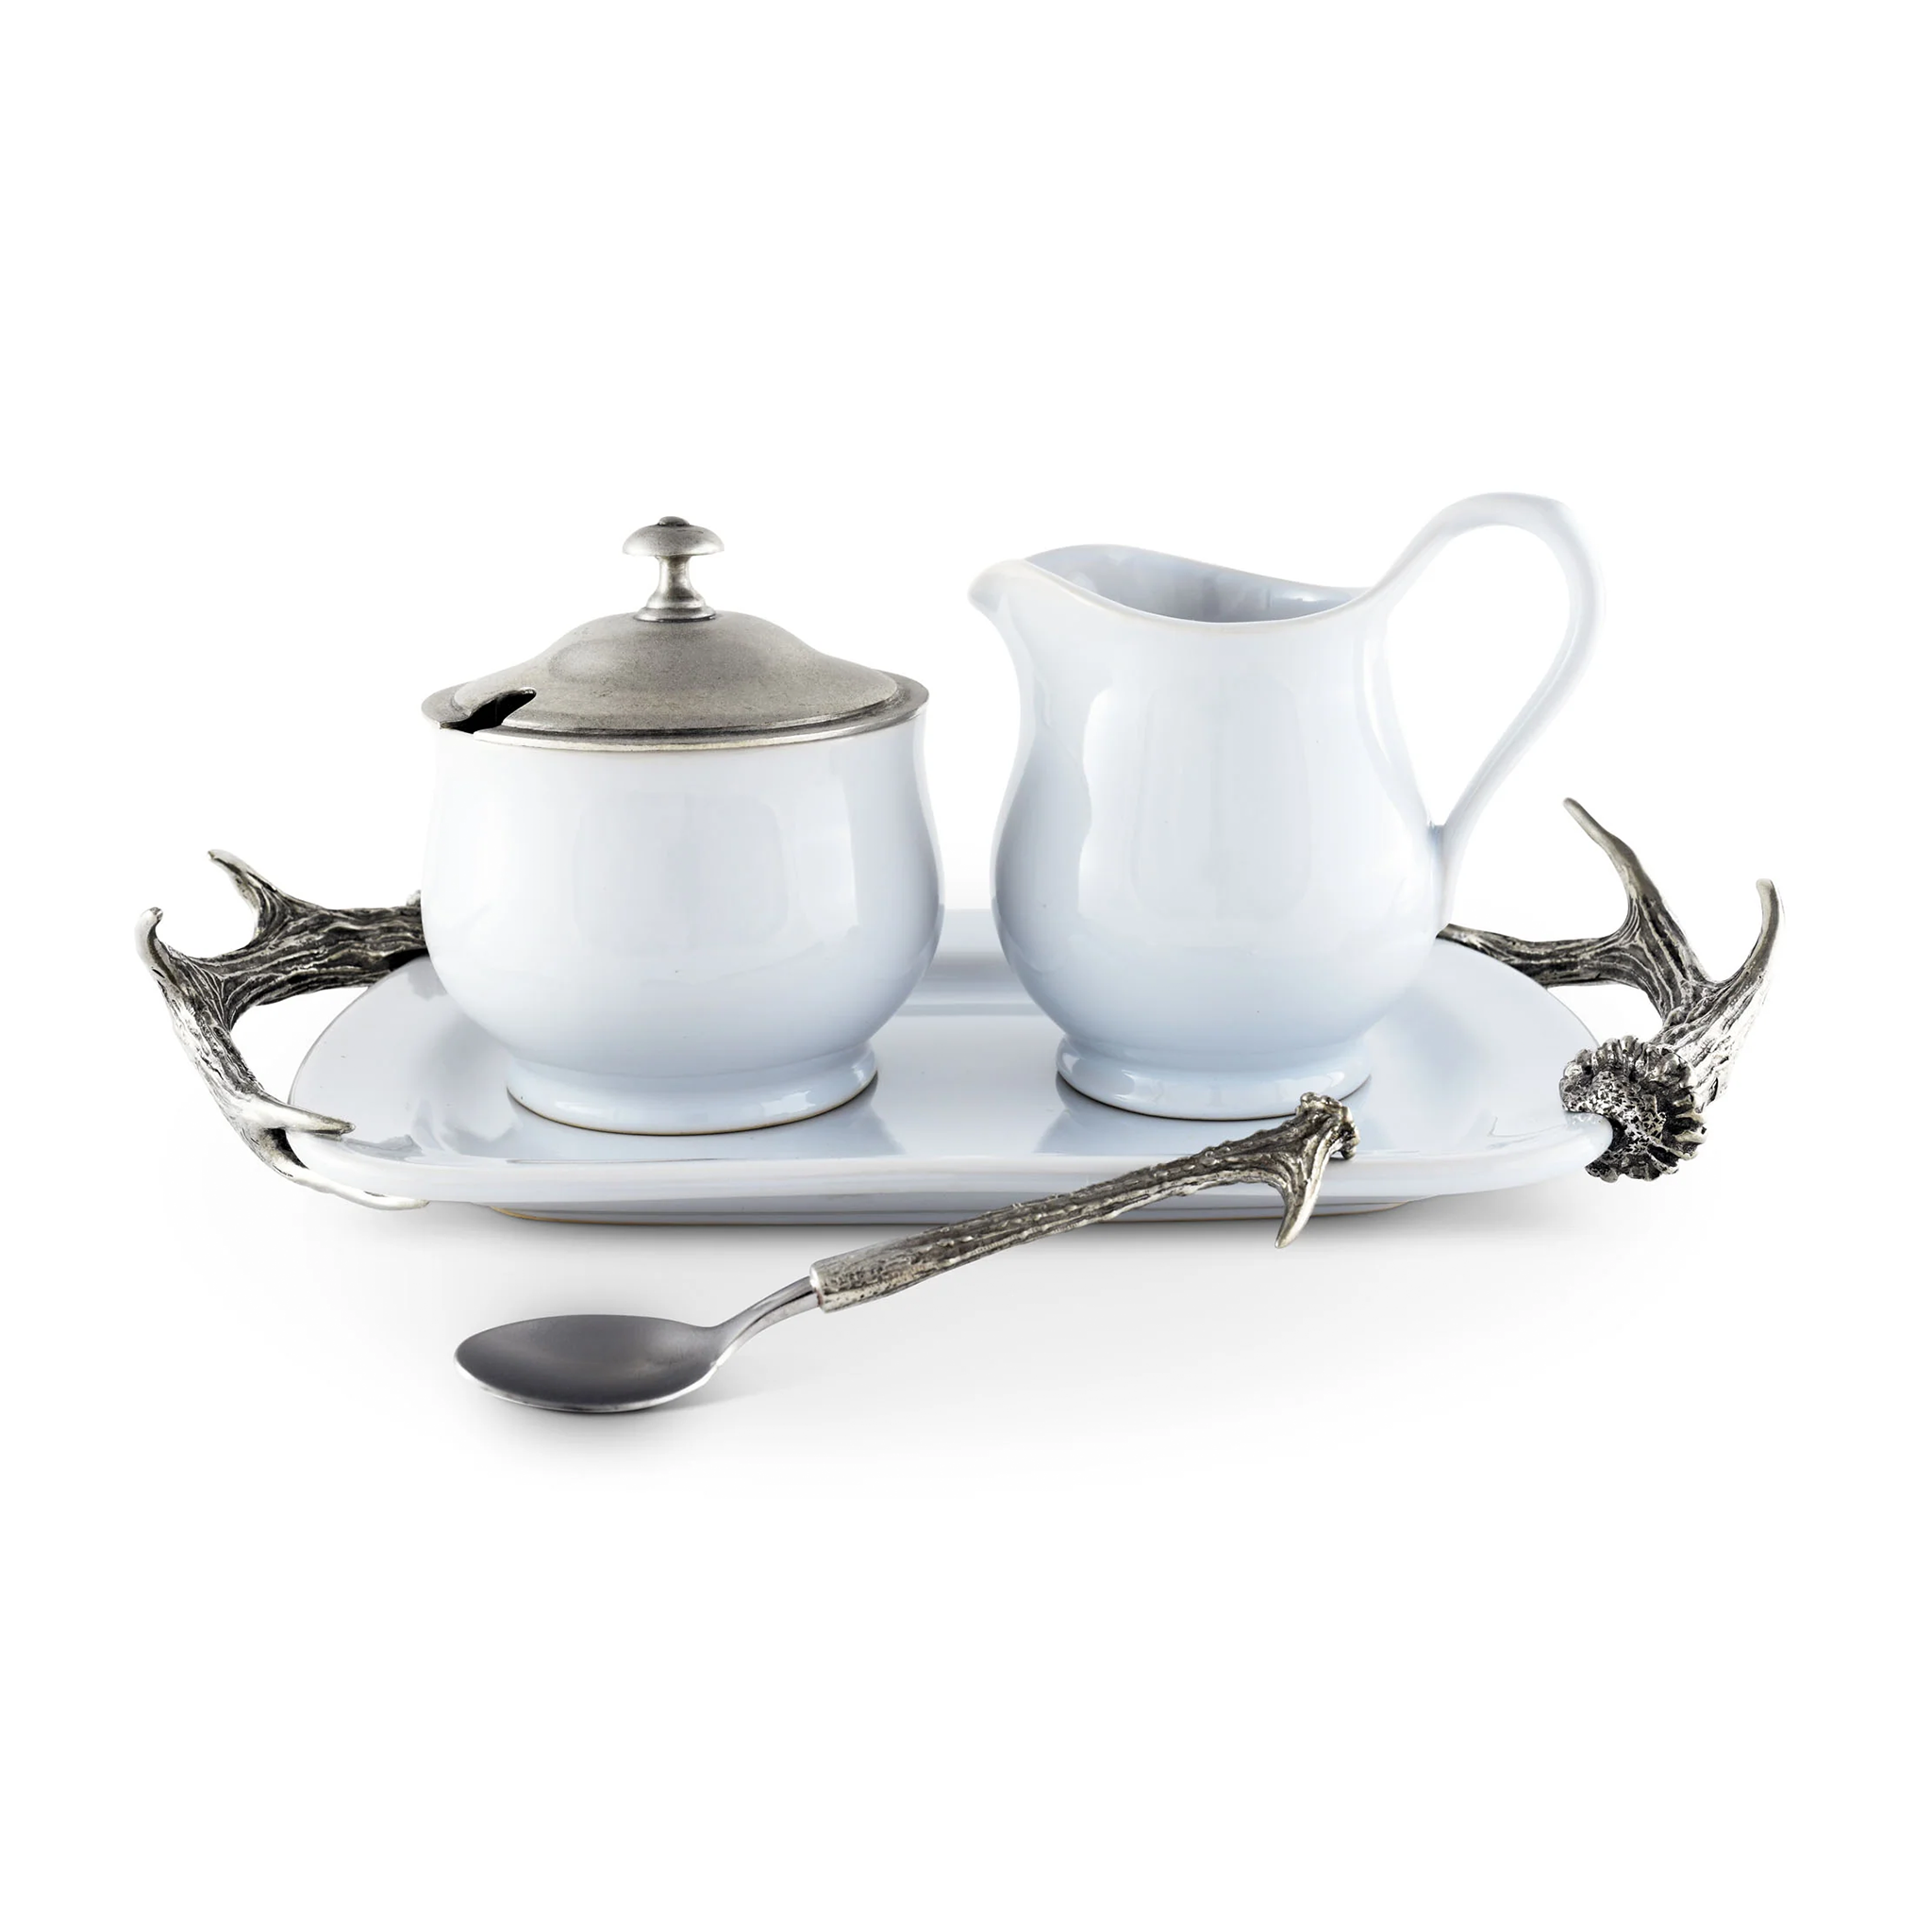 a porcelain and pewter creamer set and tray on a white surface